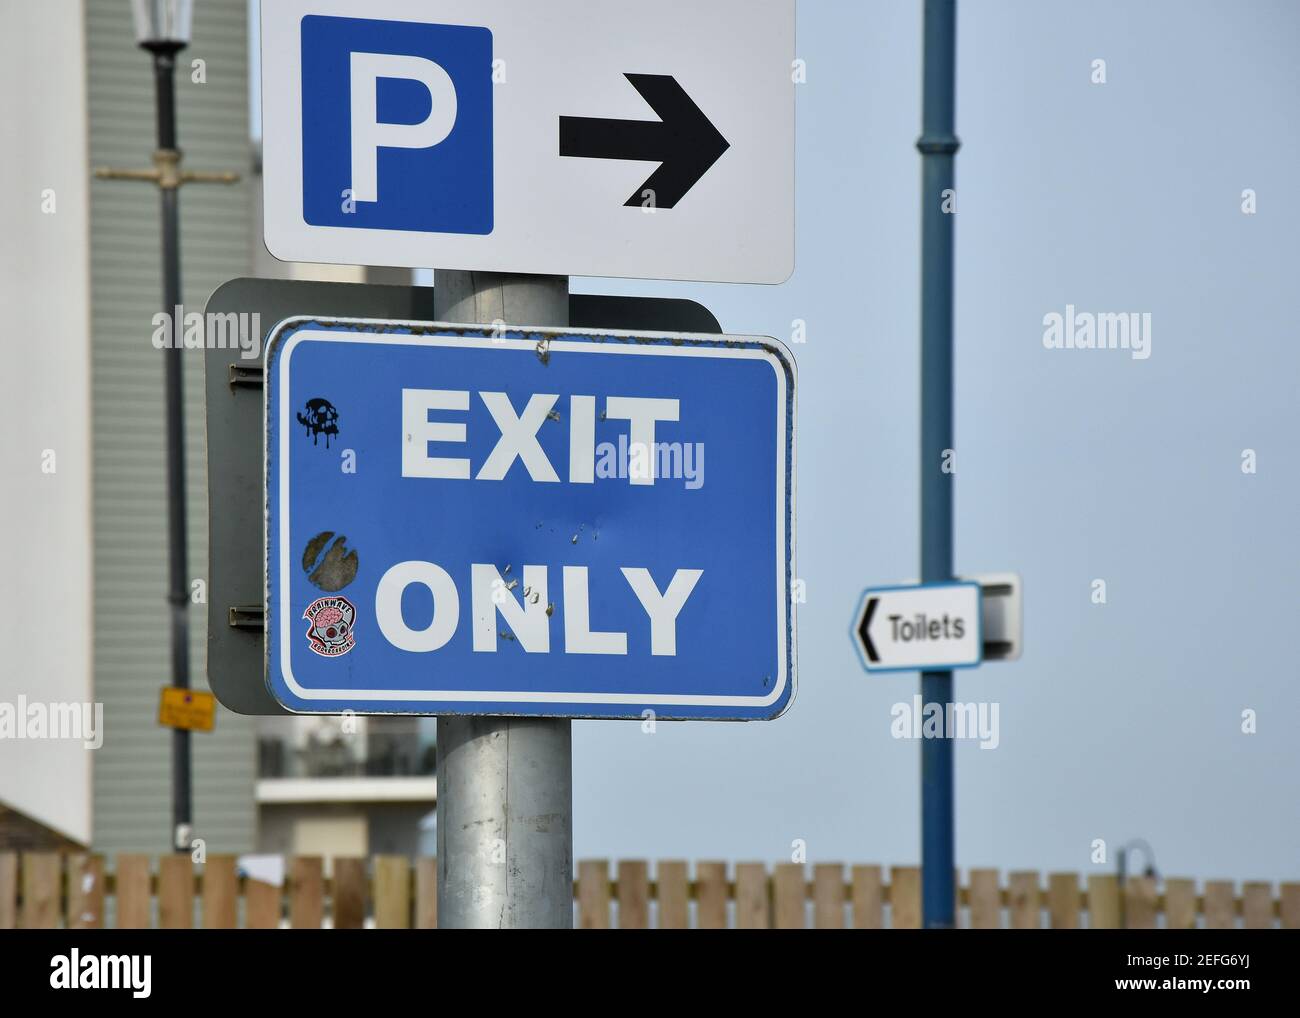 UK Road Signs as found on streets of North Devon, P, Parking, Exit Only Stock Photo